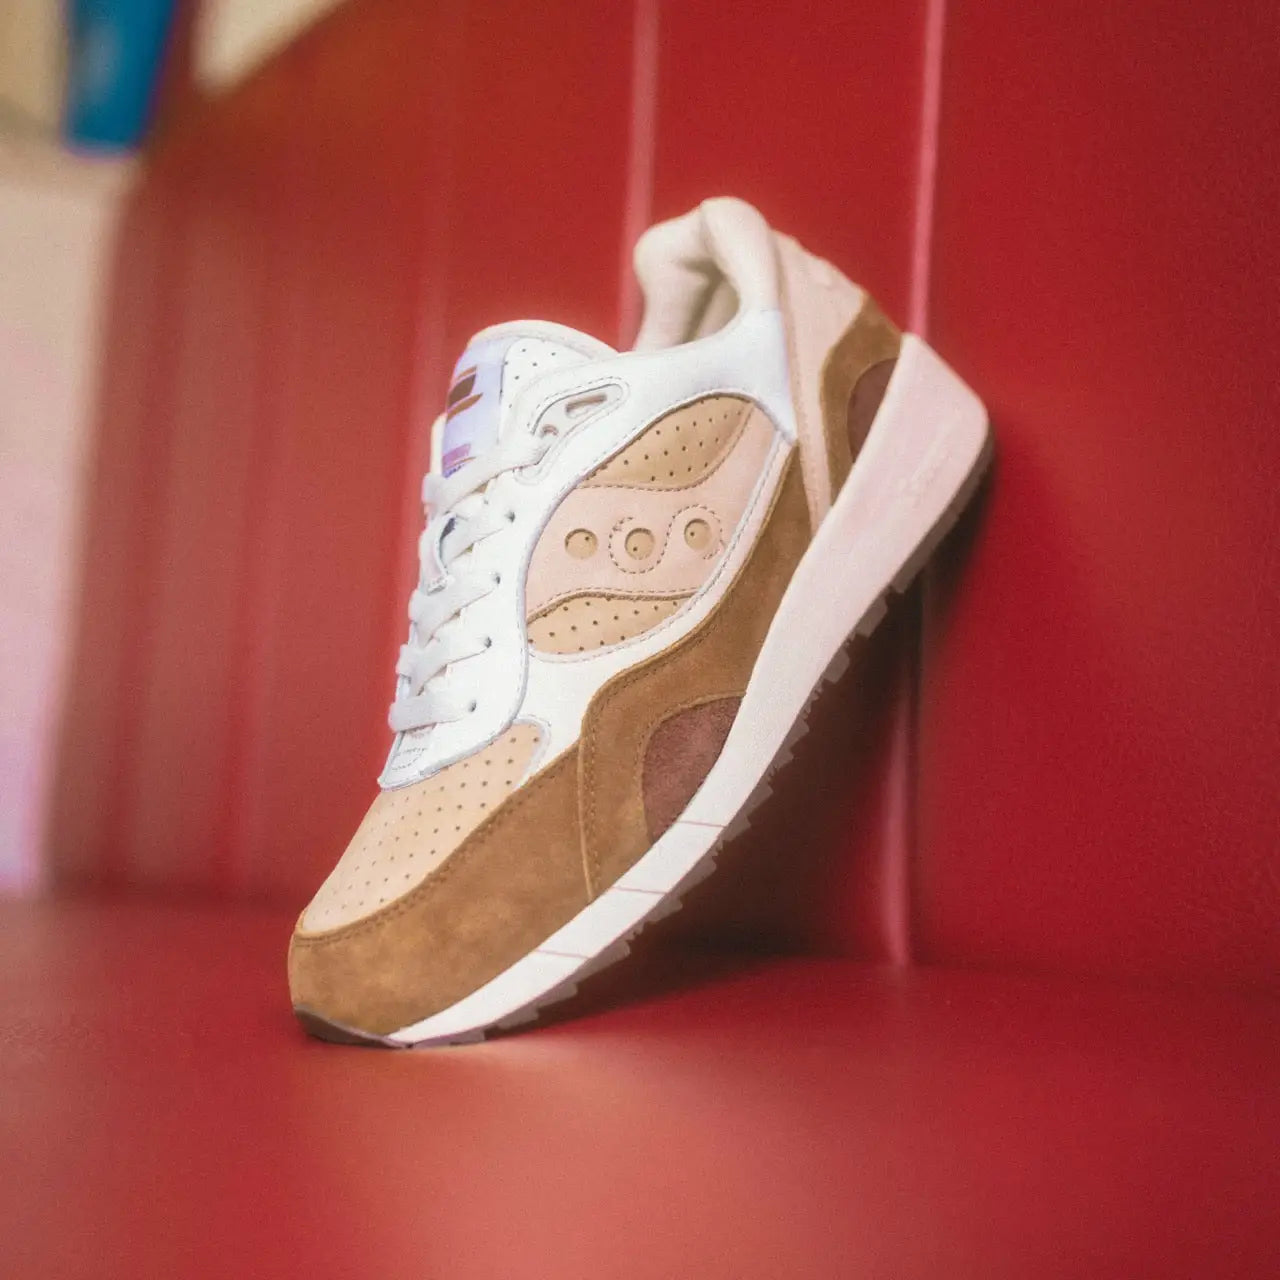 Saucony Introduces a Coffee Pack for the Coffee Lovers